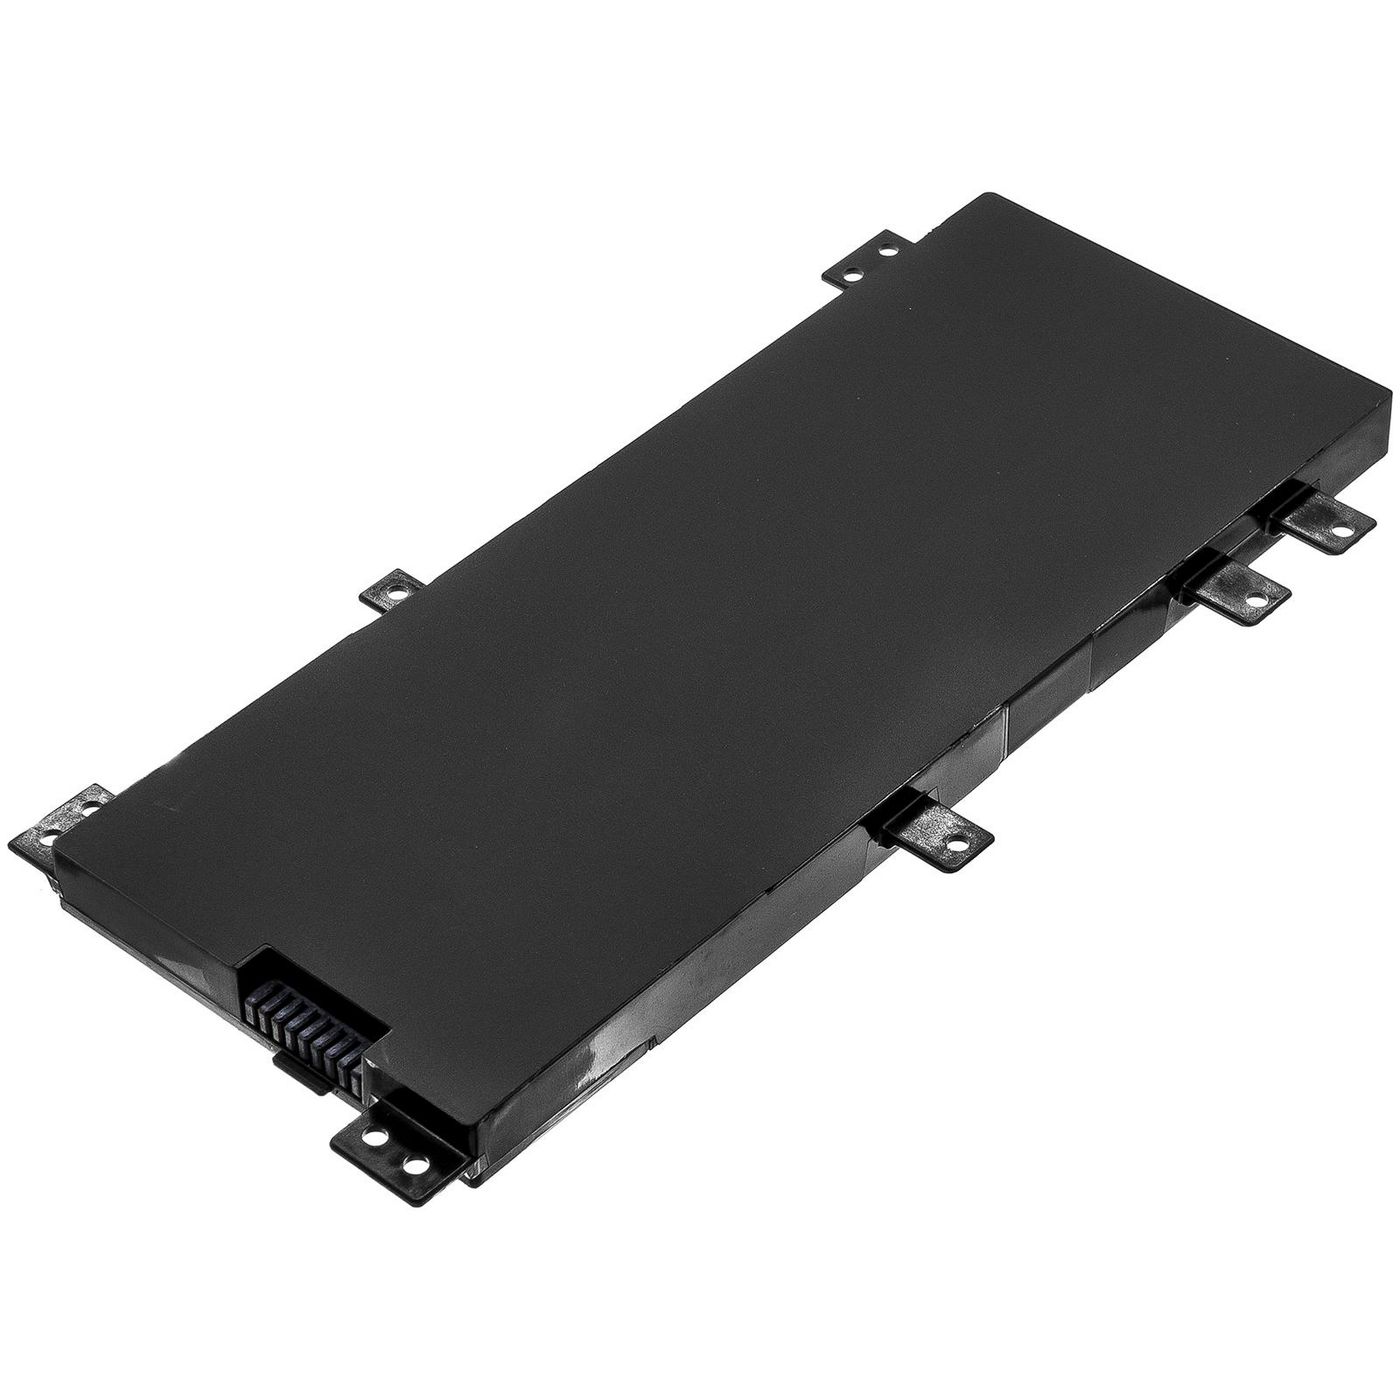 CoreParts MBXAS-BA0249 W125993375 Laptop Battery for Asus 